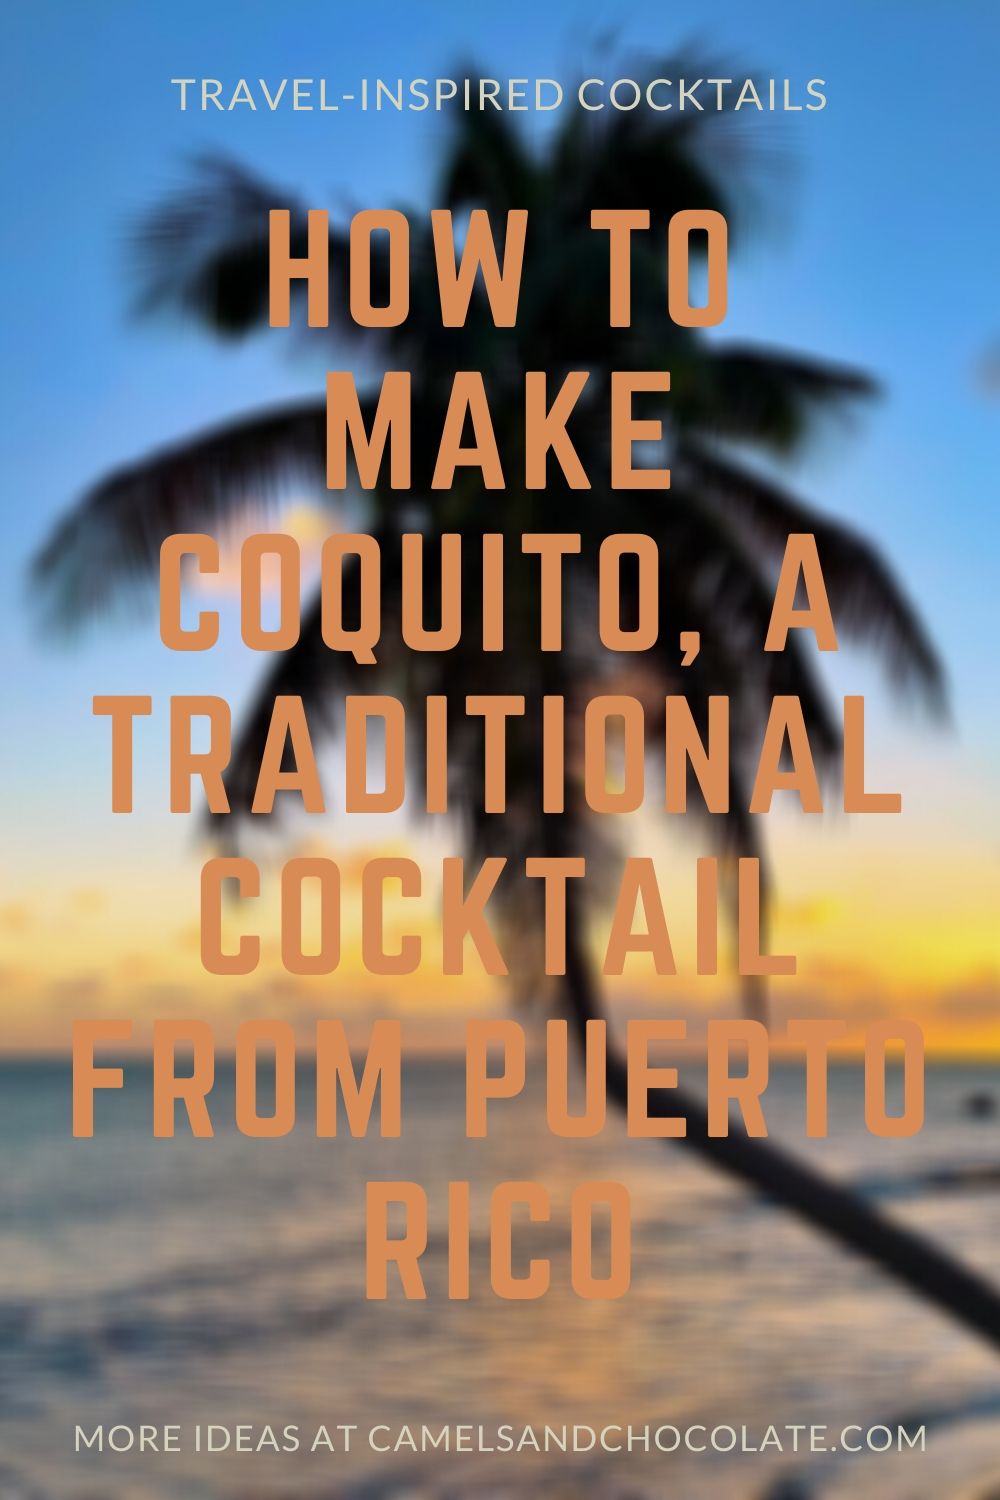 How to Make a Coquito Cocktails from Puerto Rico